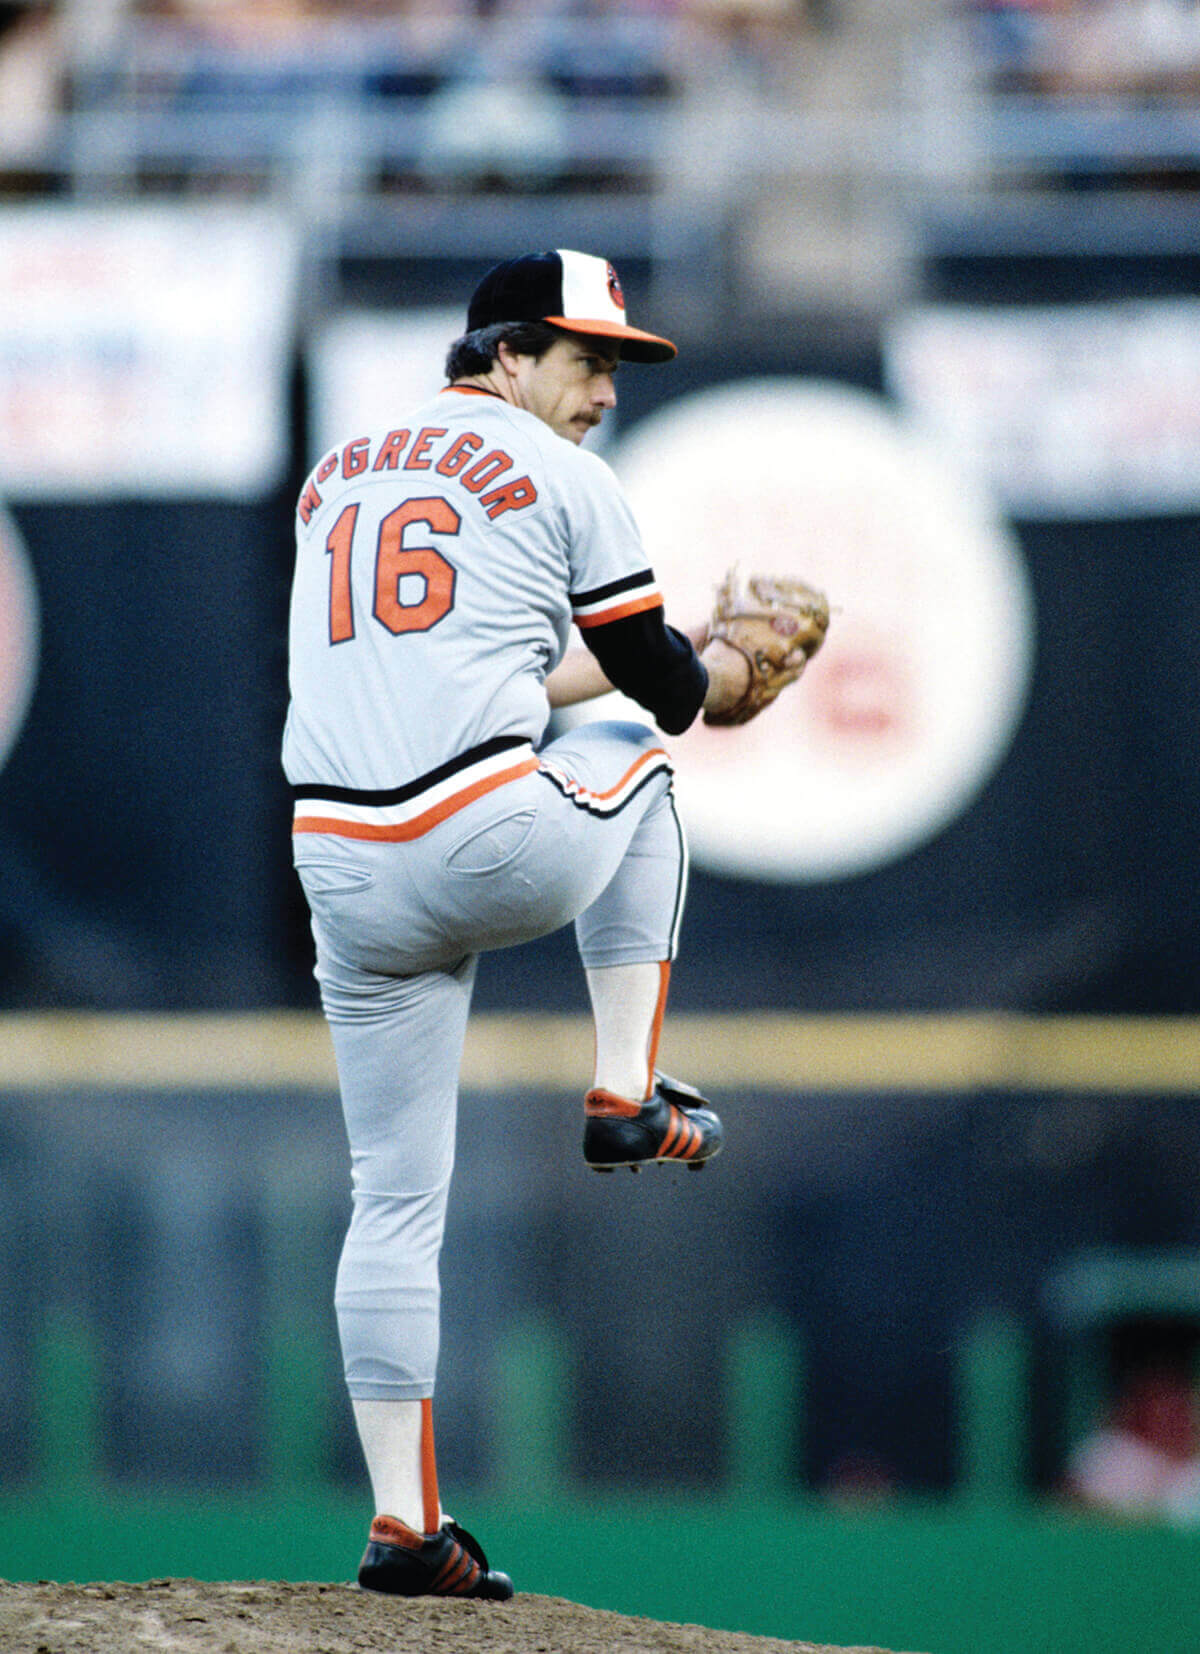 Orioles' pitcher Dave McNally pitches during game 3 the 1970 World